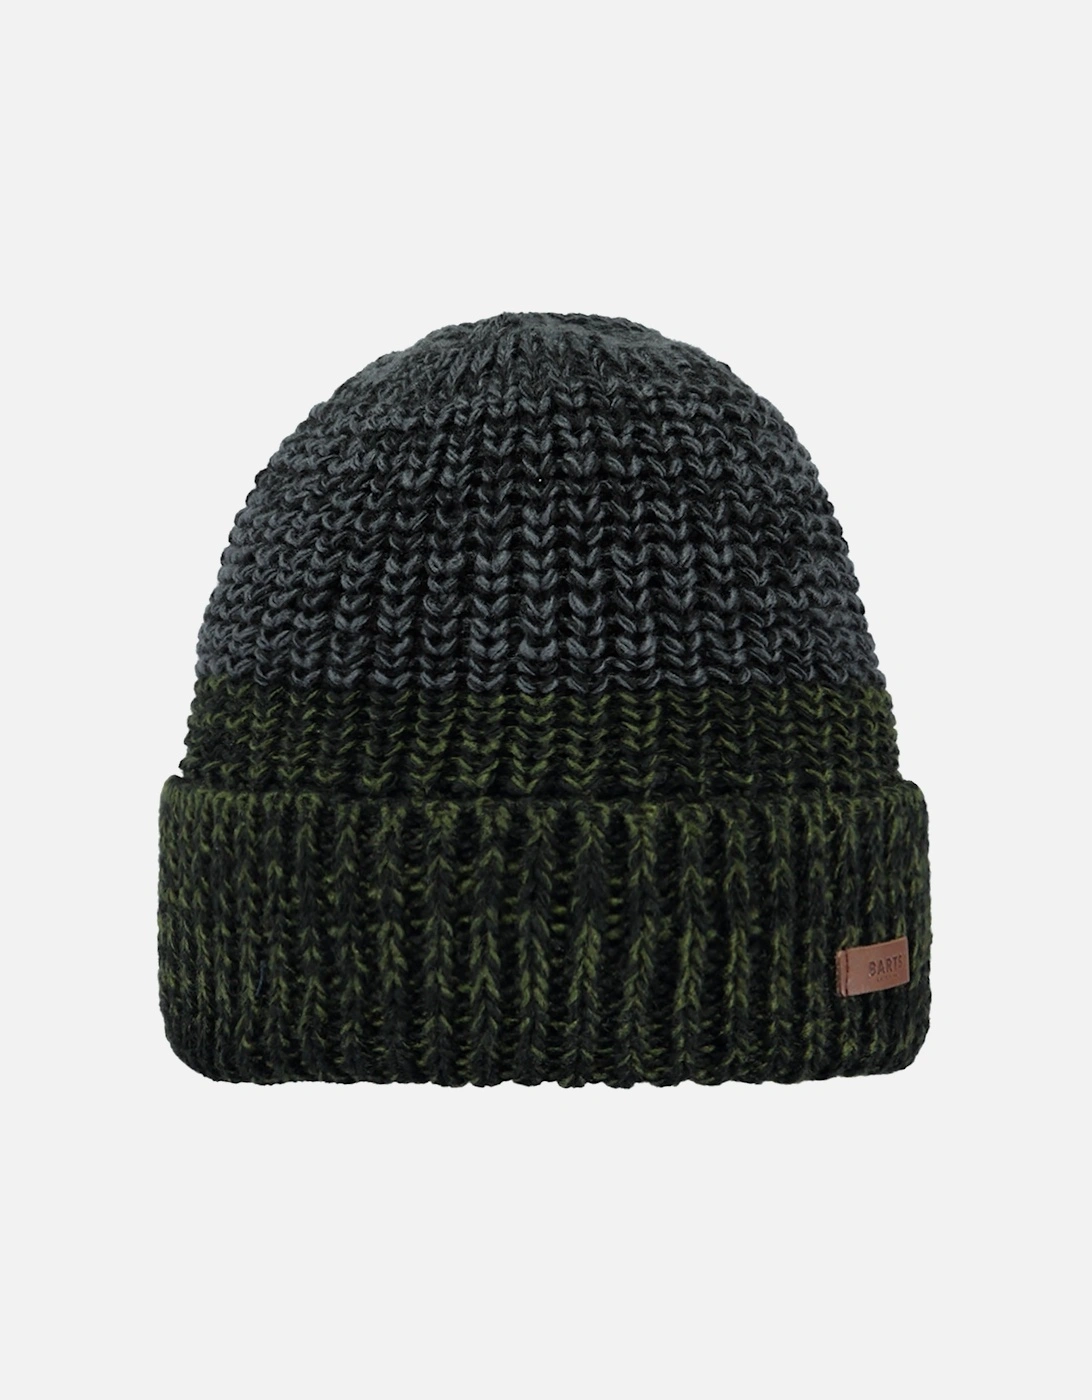 Mens Arctic Knitted Beanie Hat